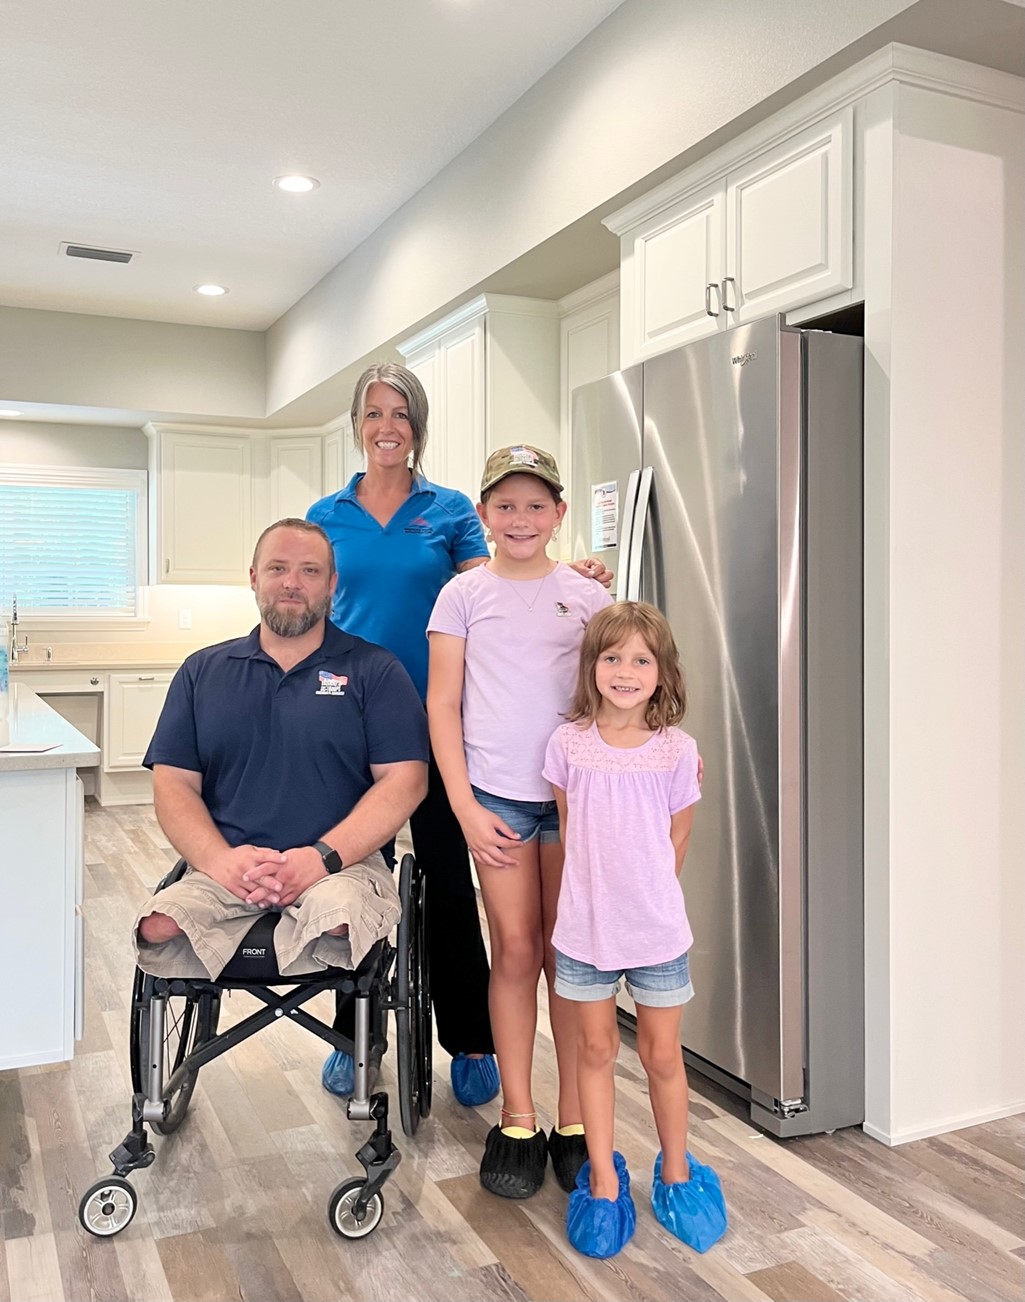 Marketing Manager, Susan Hart, and her daughters helped Homes For Our Troops welcome Army Sergeant Chad Rozanski to his new custom home in Orlando, FL.